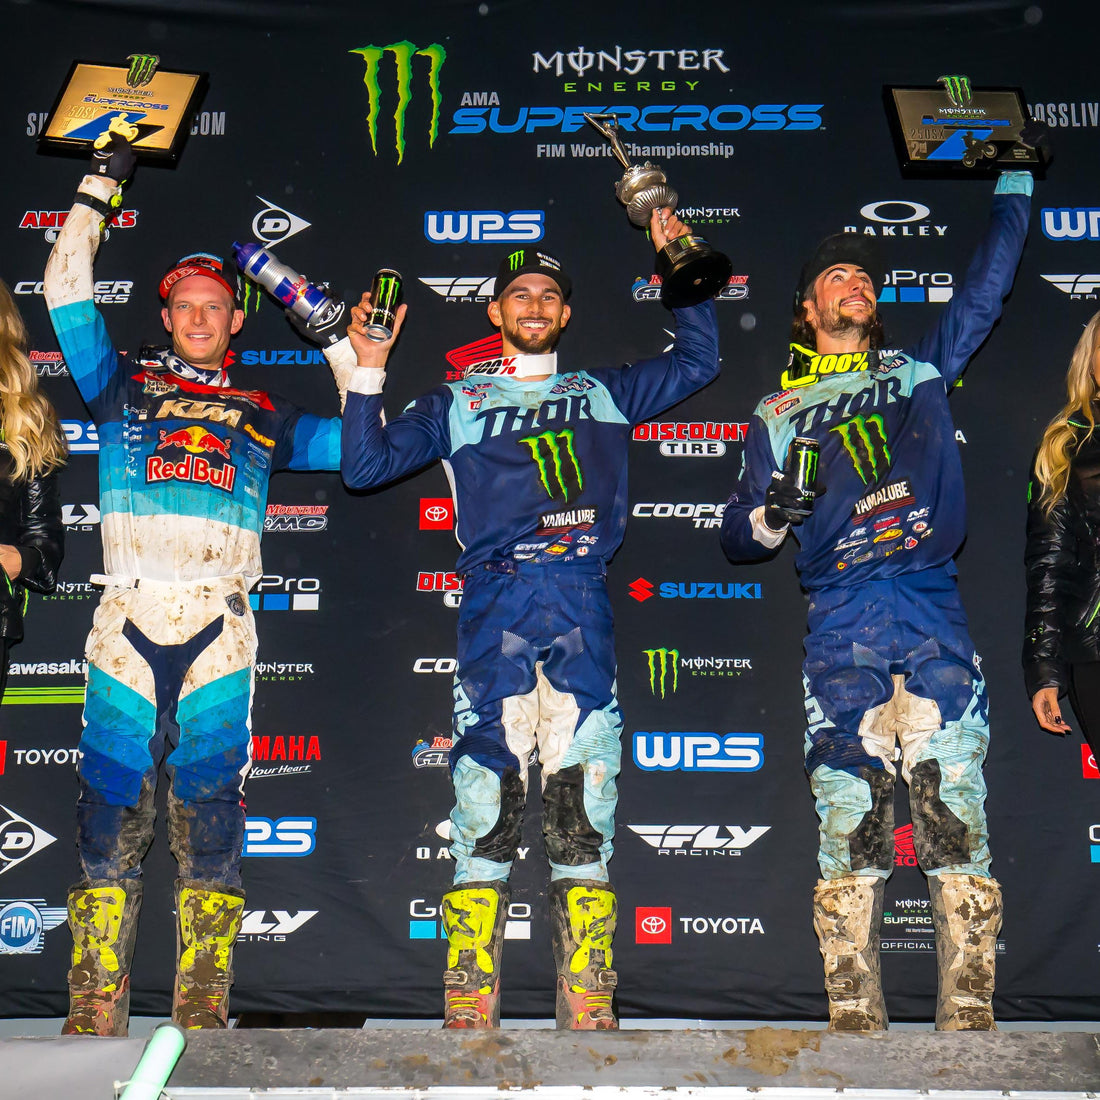 Troy Lee Designs/Red Bull/Ktm'S Shane Mcelrath On The Podium At A1 Featured Image